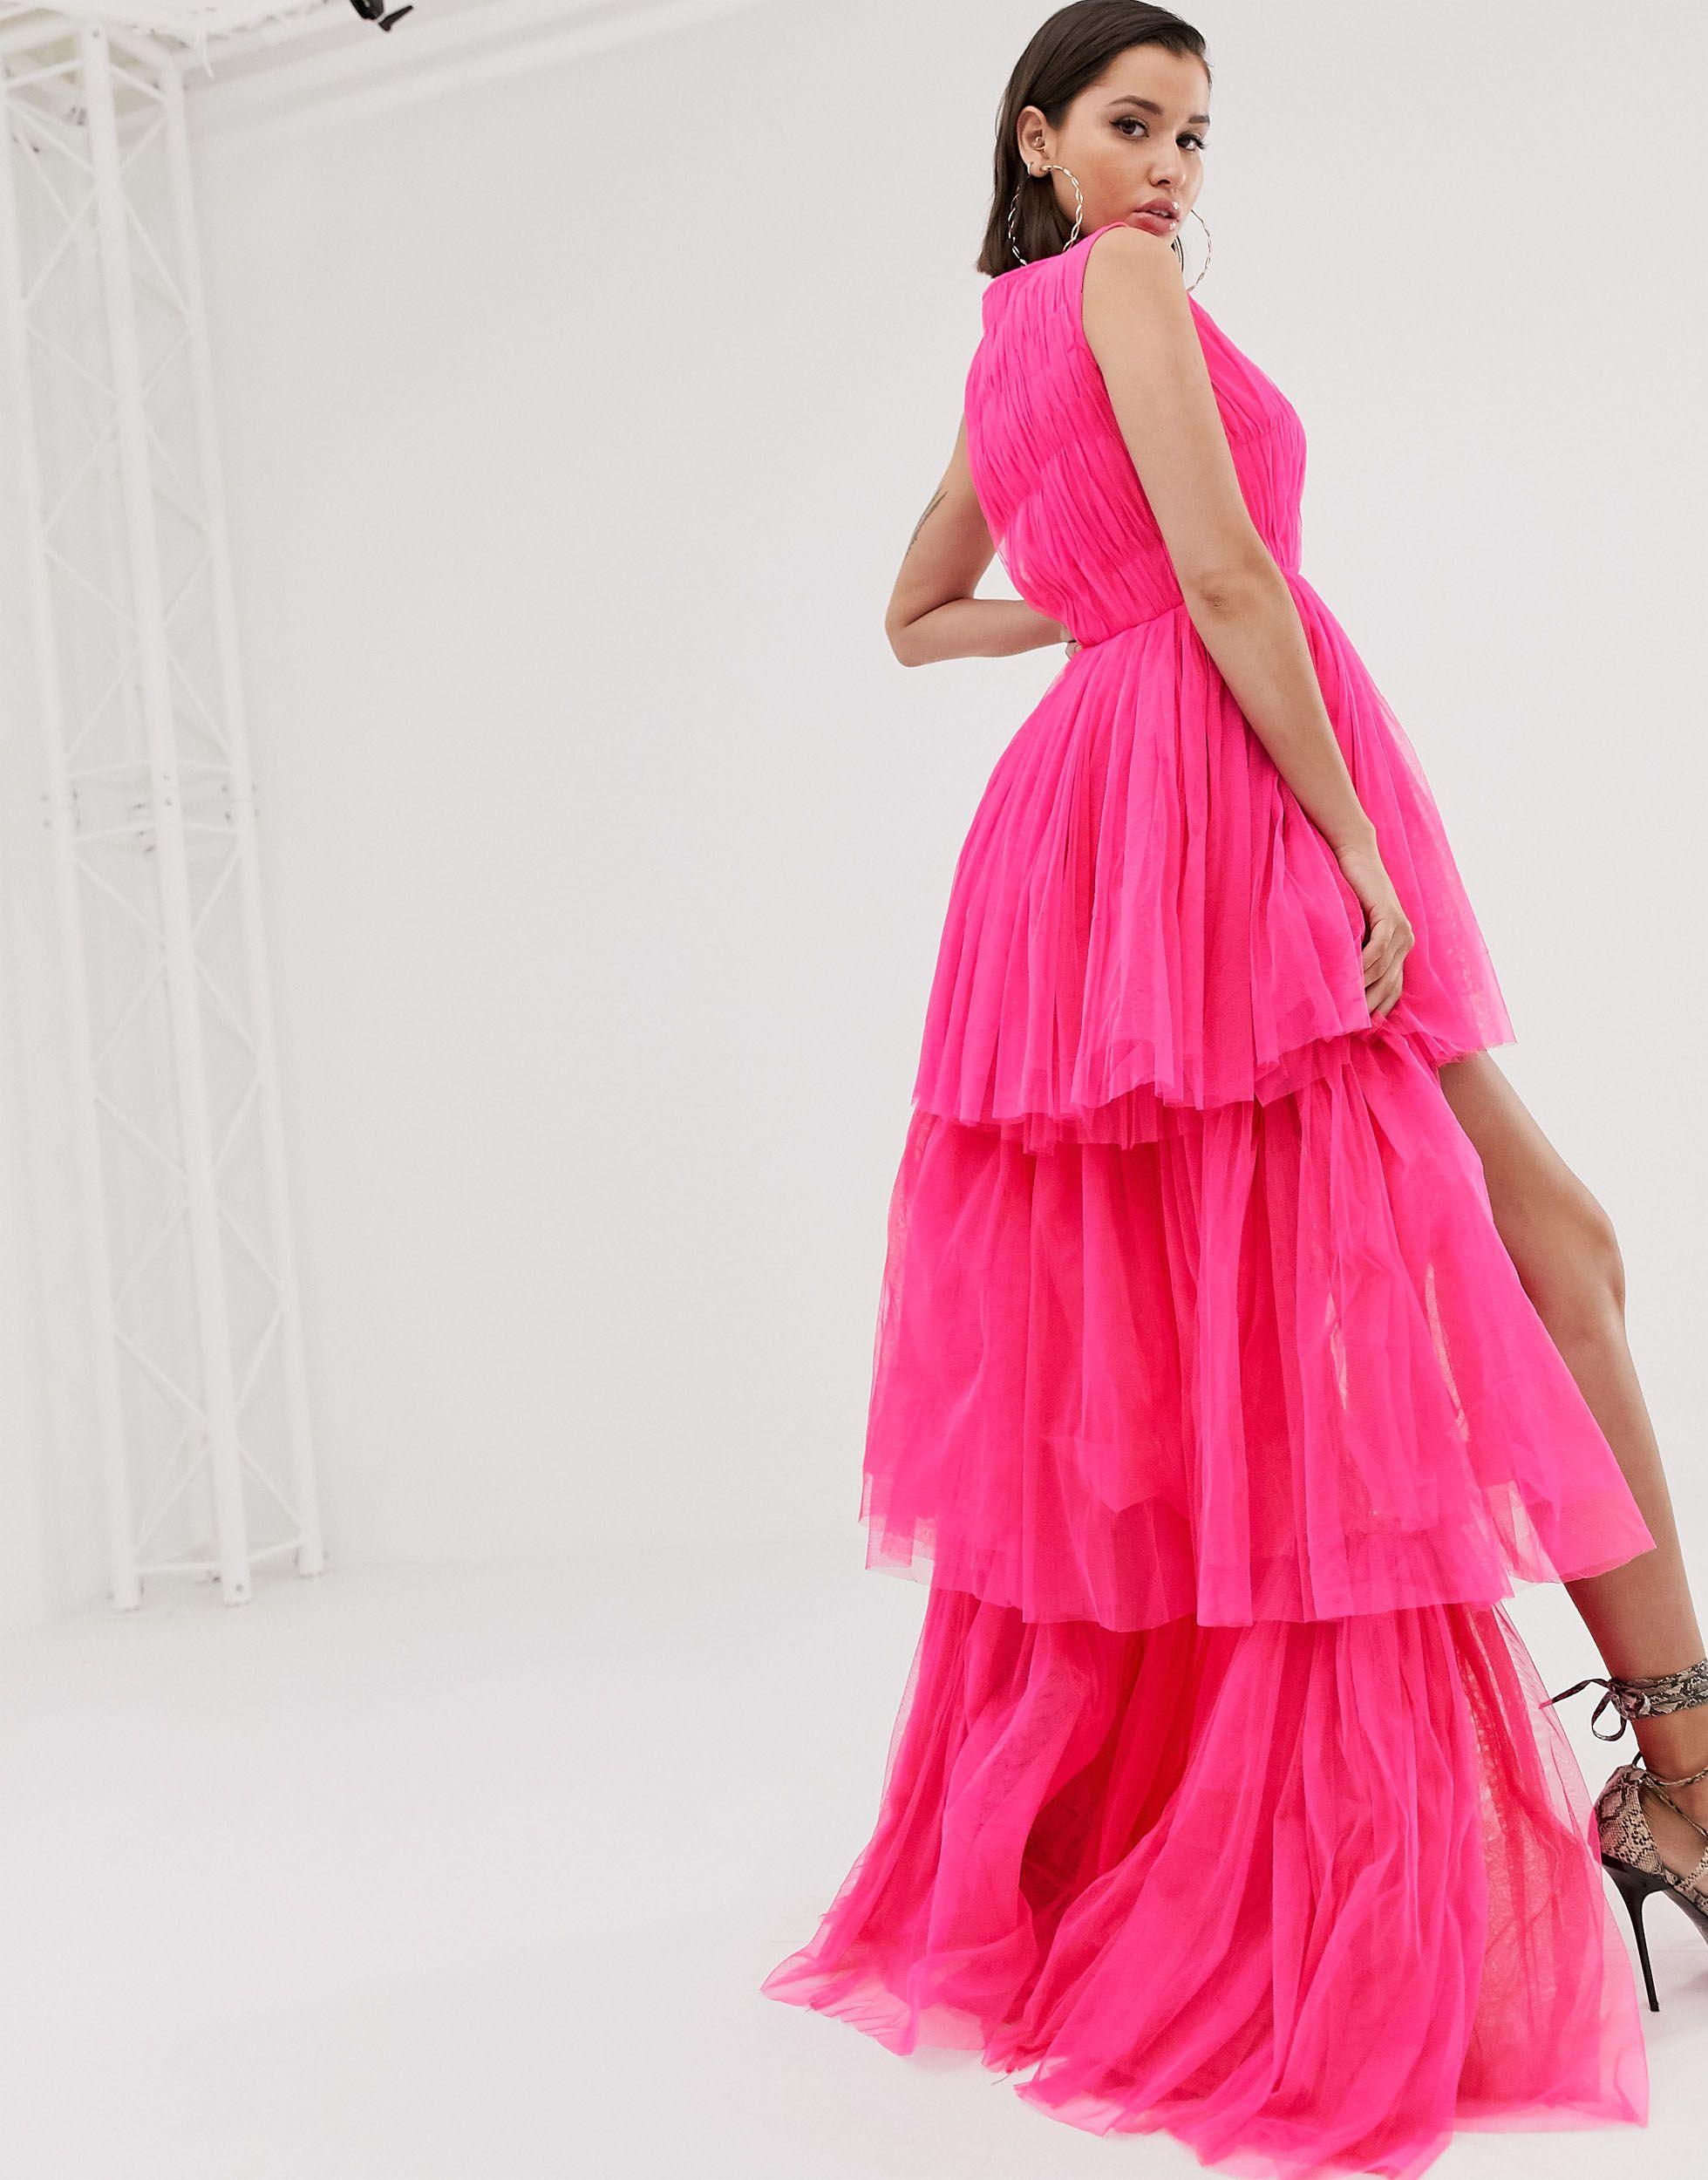 LACE & BEADS Tulle Layered Maxi Dress in Pink | Lyst